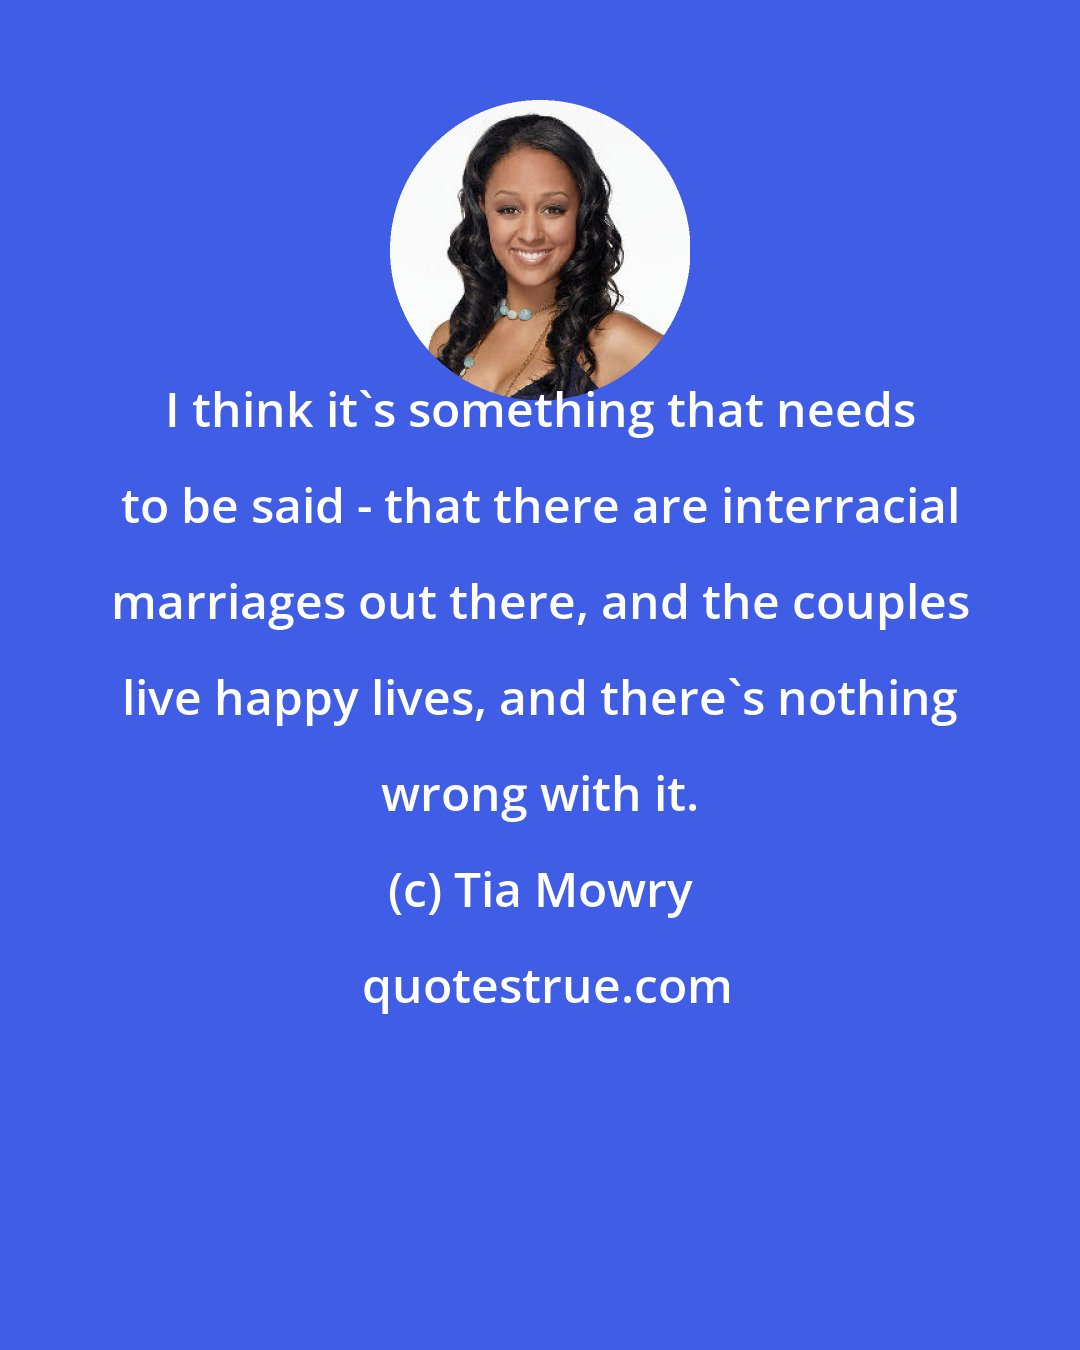 Tia Mowry: I think it's something that needs to be said - that there are interracial marriages out there, and the couples live happy lives, and there's nothing wrong with it.